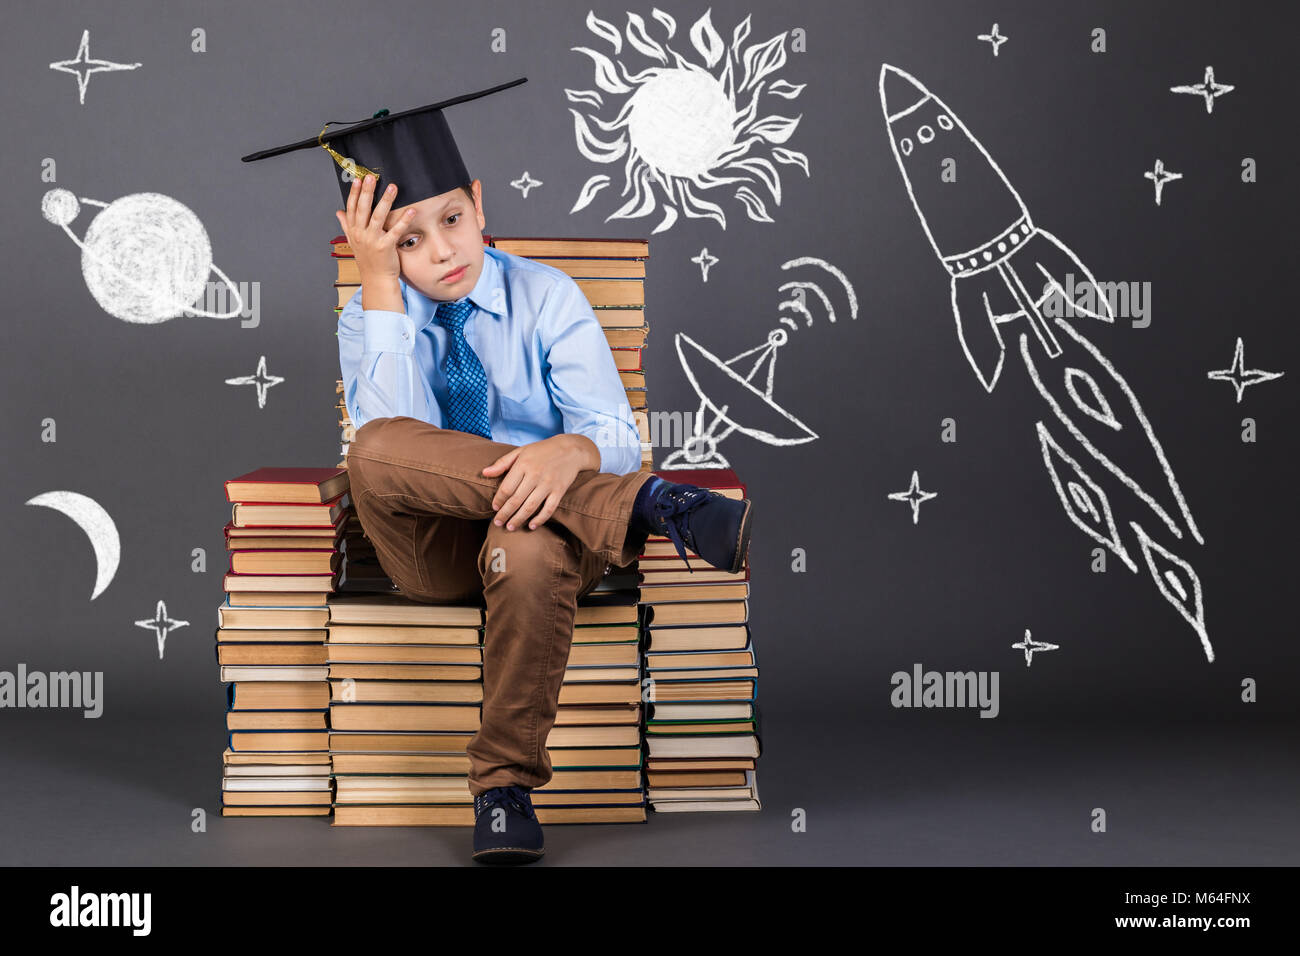 Education concept. Boy dreaming of space travel and distant planets Stock Photo